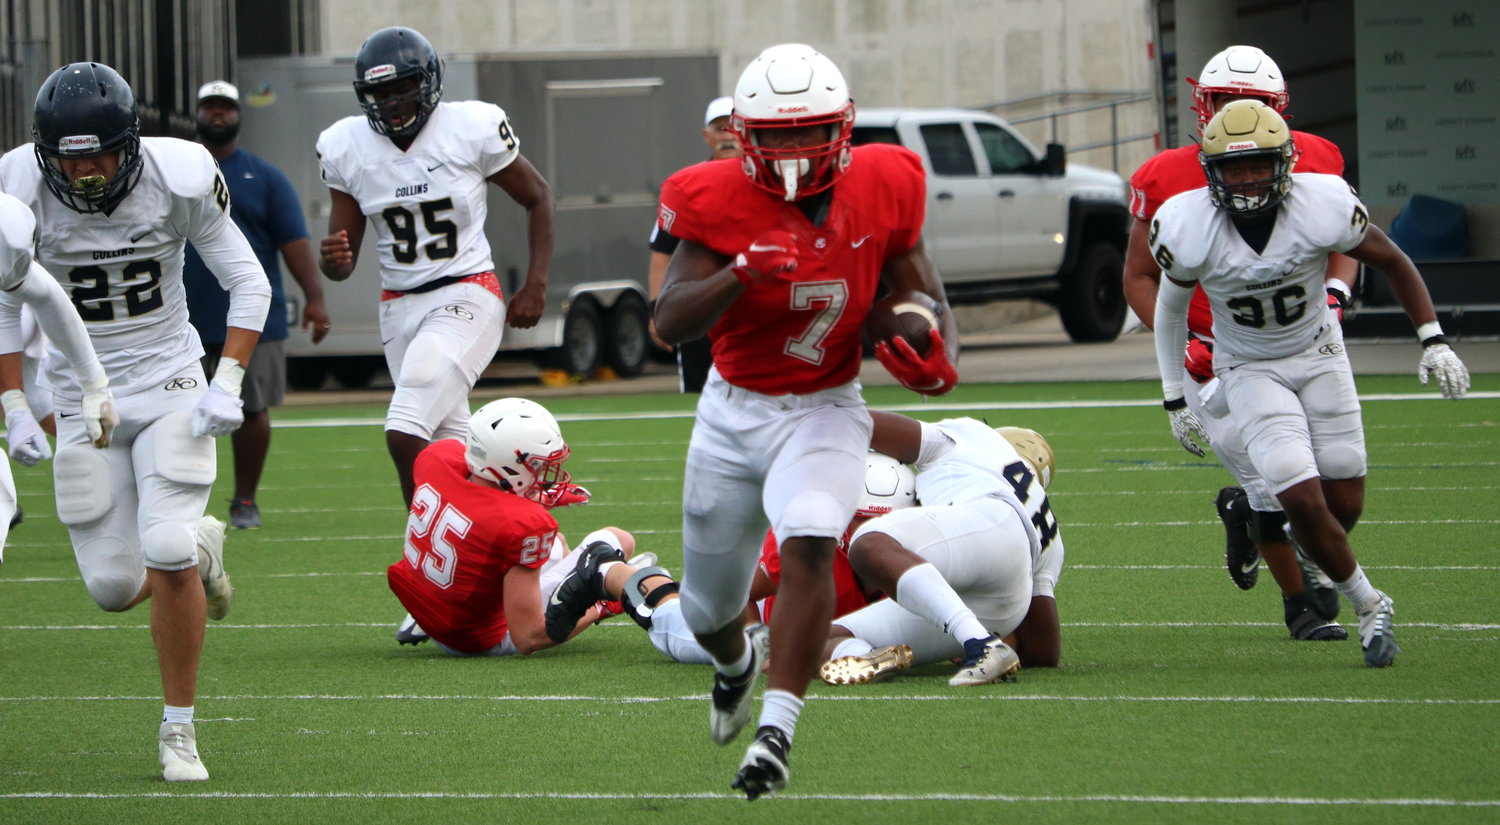 Katy’s Ramarian Tillman breaks free on a run during Katy’s scrimmage against Klein Collins on Friday at Legacy Stadium.